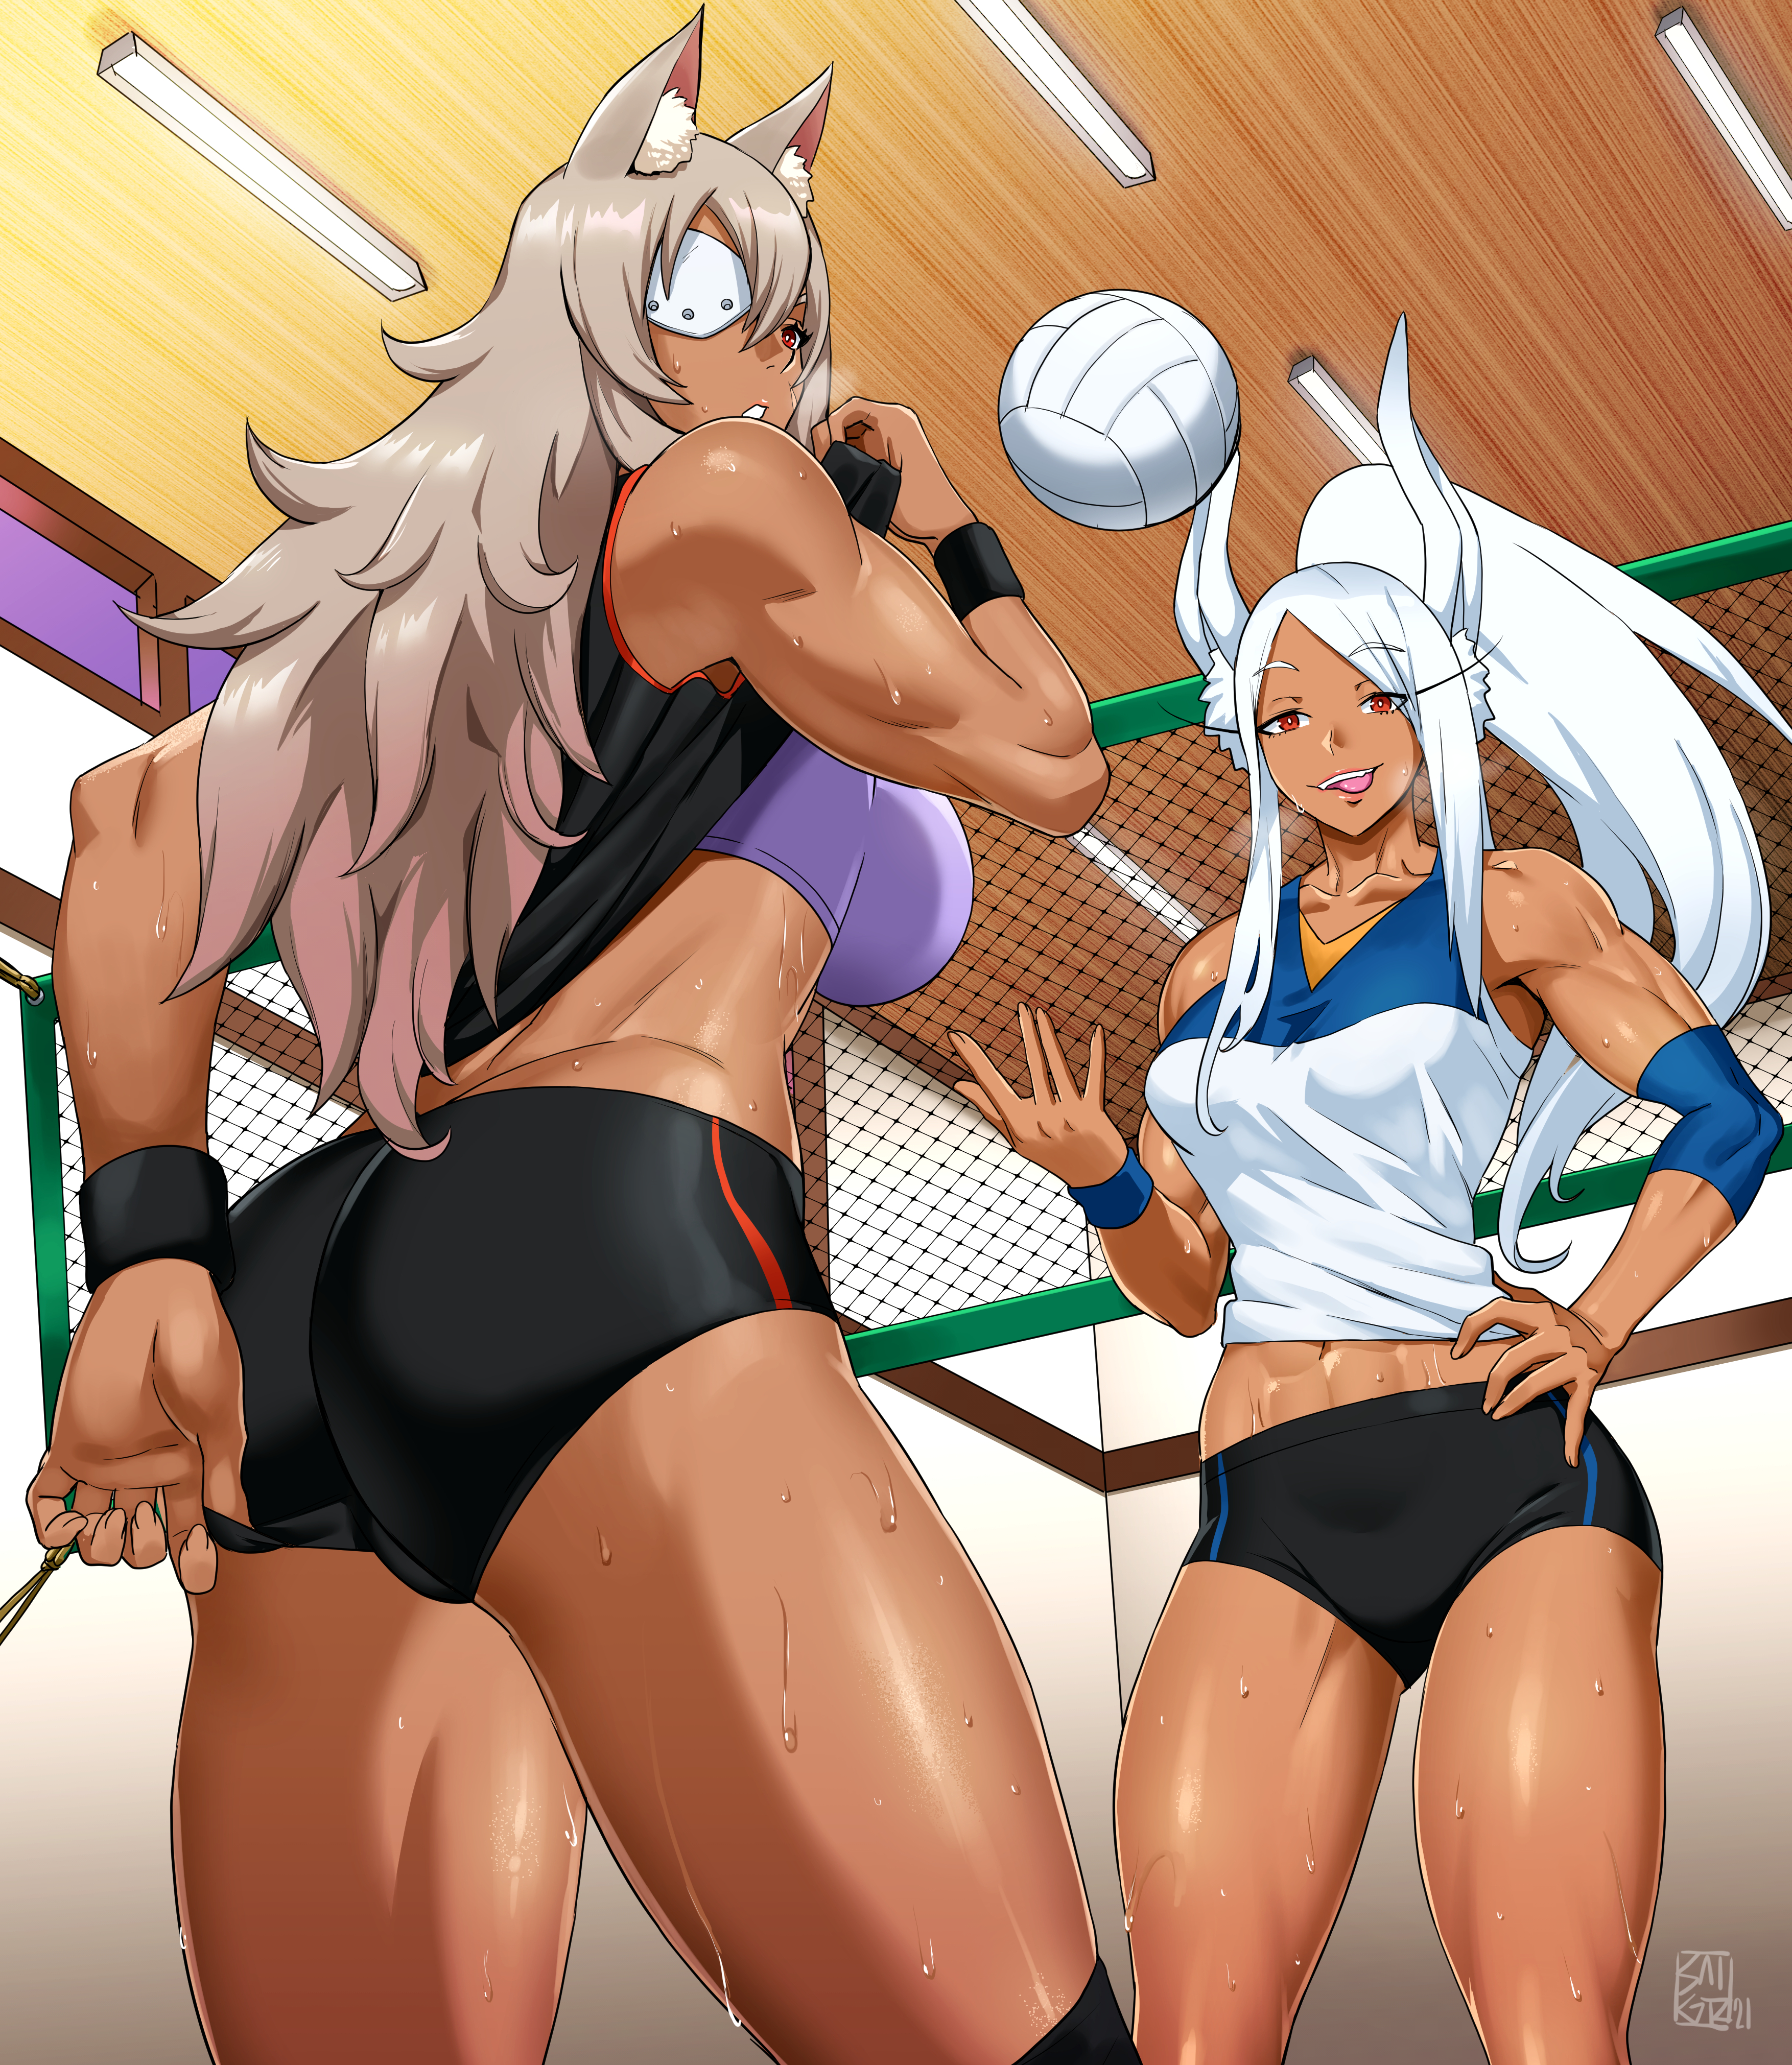 Anime 3508x4043 Boku no Hero Academia Mushoku Tensei big boobs volleyball sweaty body smug face tongue out eyepatches thighs sportswear purple bra sports bra 6-pack biceps abs muscular belly lifted tank top bangs ponytail wolf ears bunny ears Ghislaine Dedoldia Usagiyama Rumi ecchi anime girls crossover long hair bare shoulders white hair brunette messy hair muscles rear view low-angle looking at viewer 2D anime portrait display sweat belly button women indoors fan art artwork ass